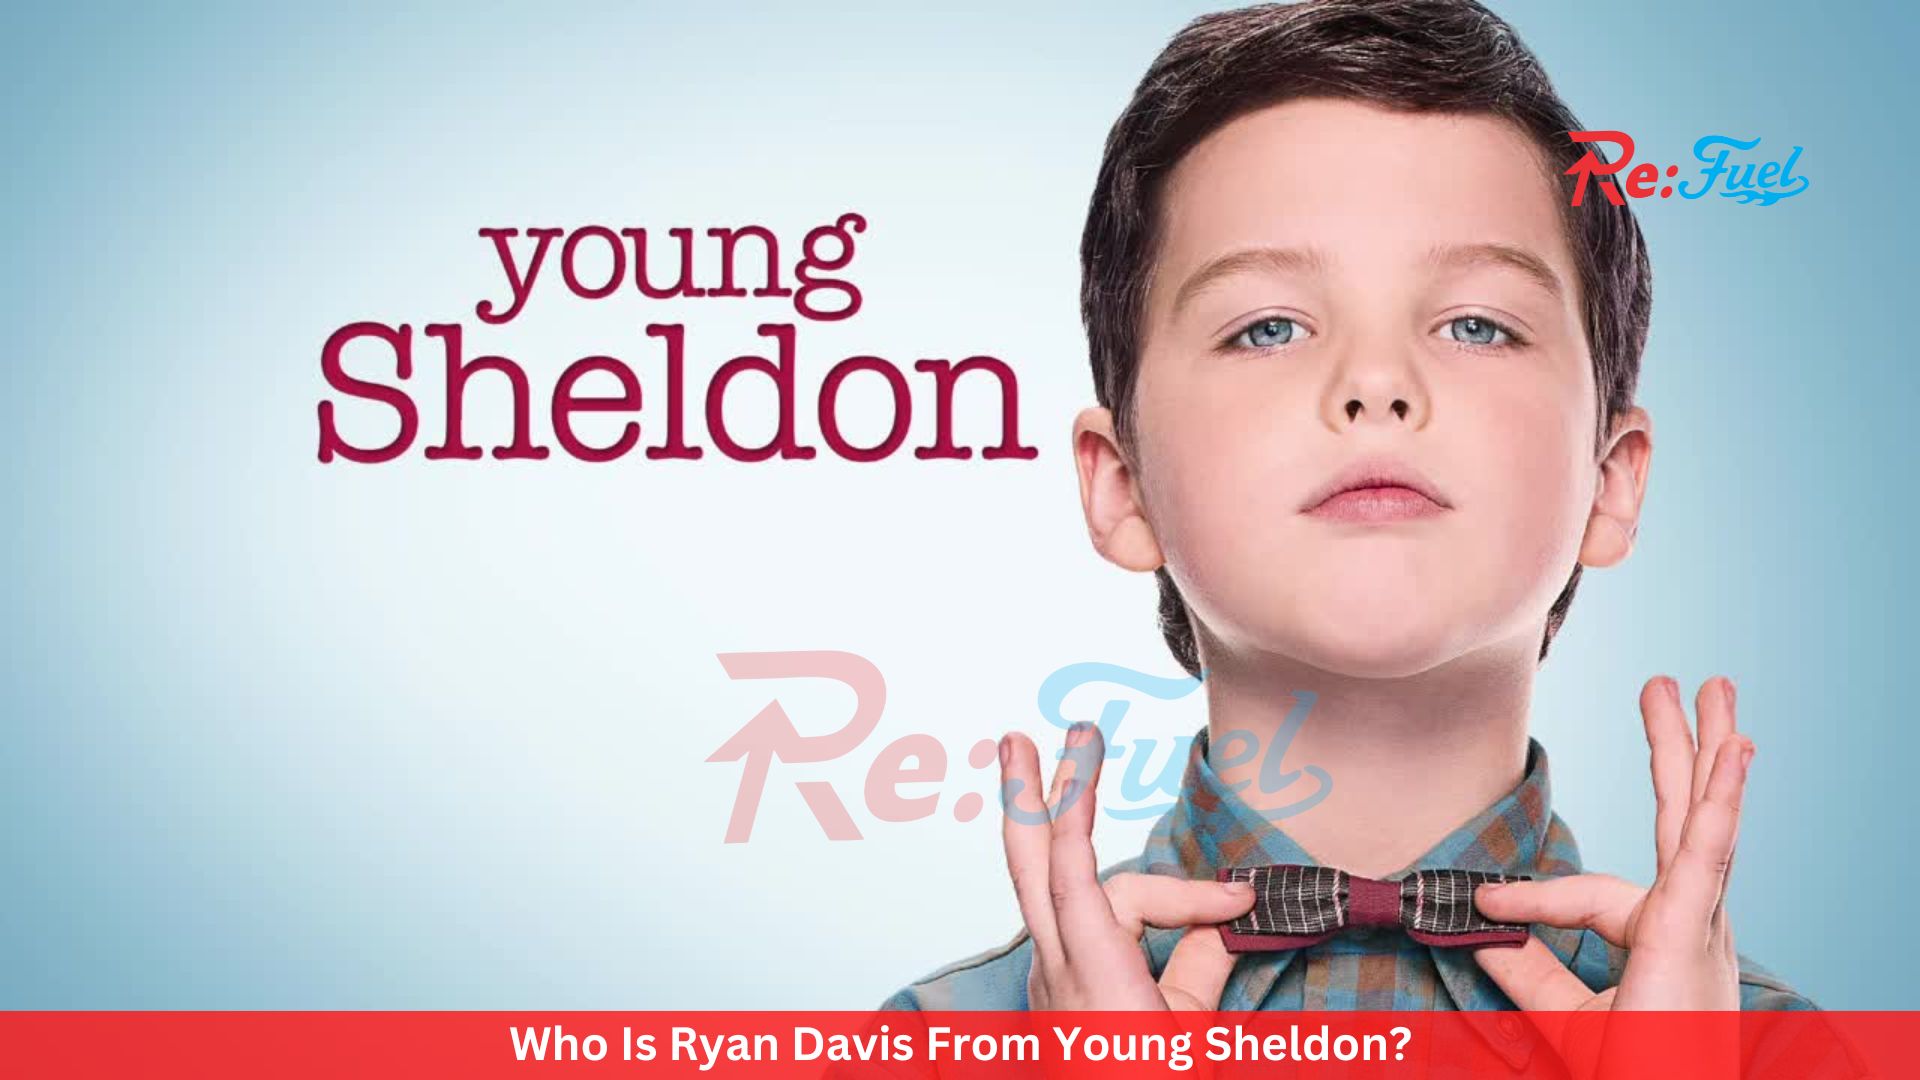 Who Is Ryan Davis From Young Sheldon?